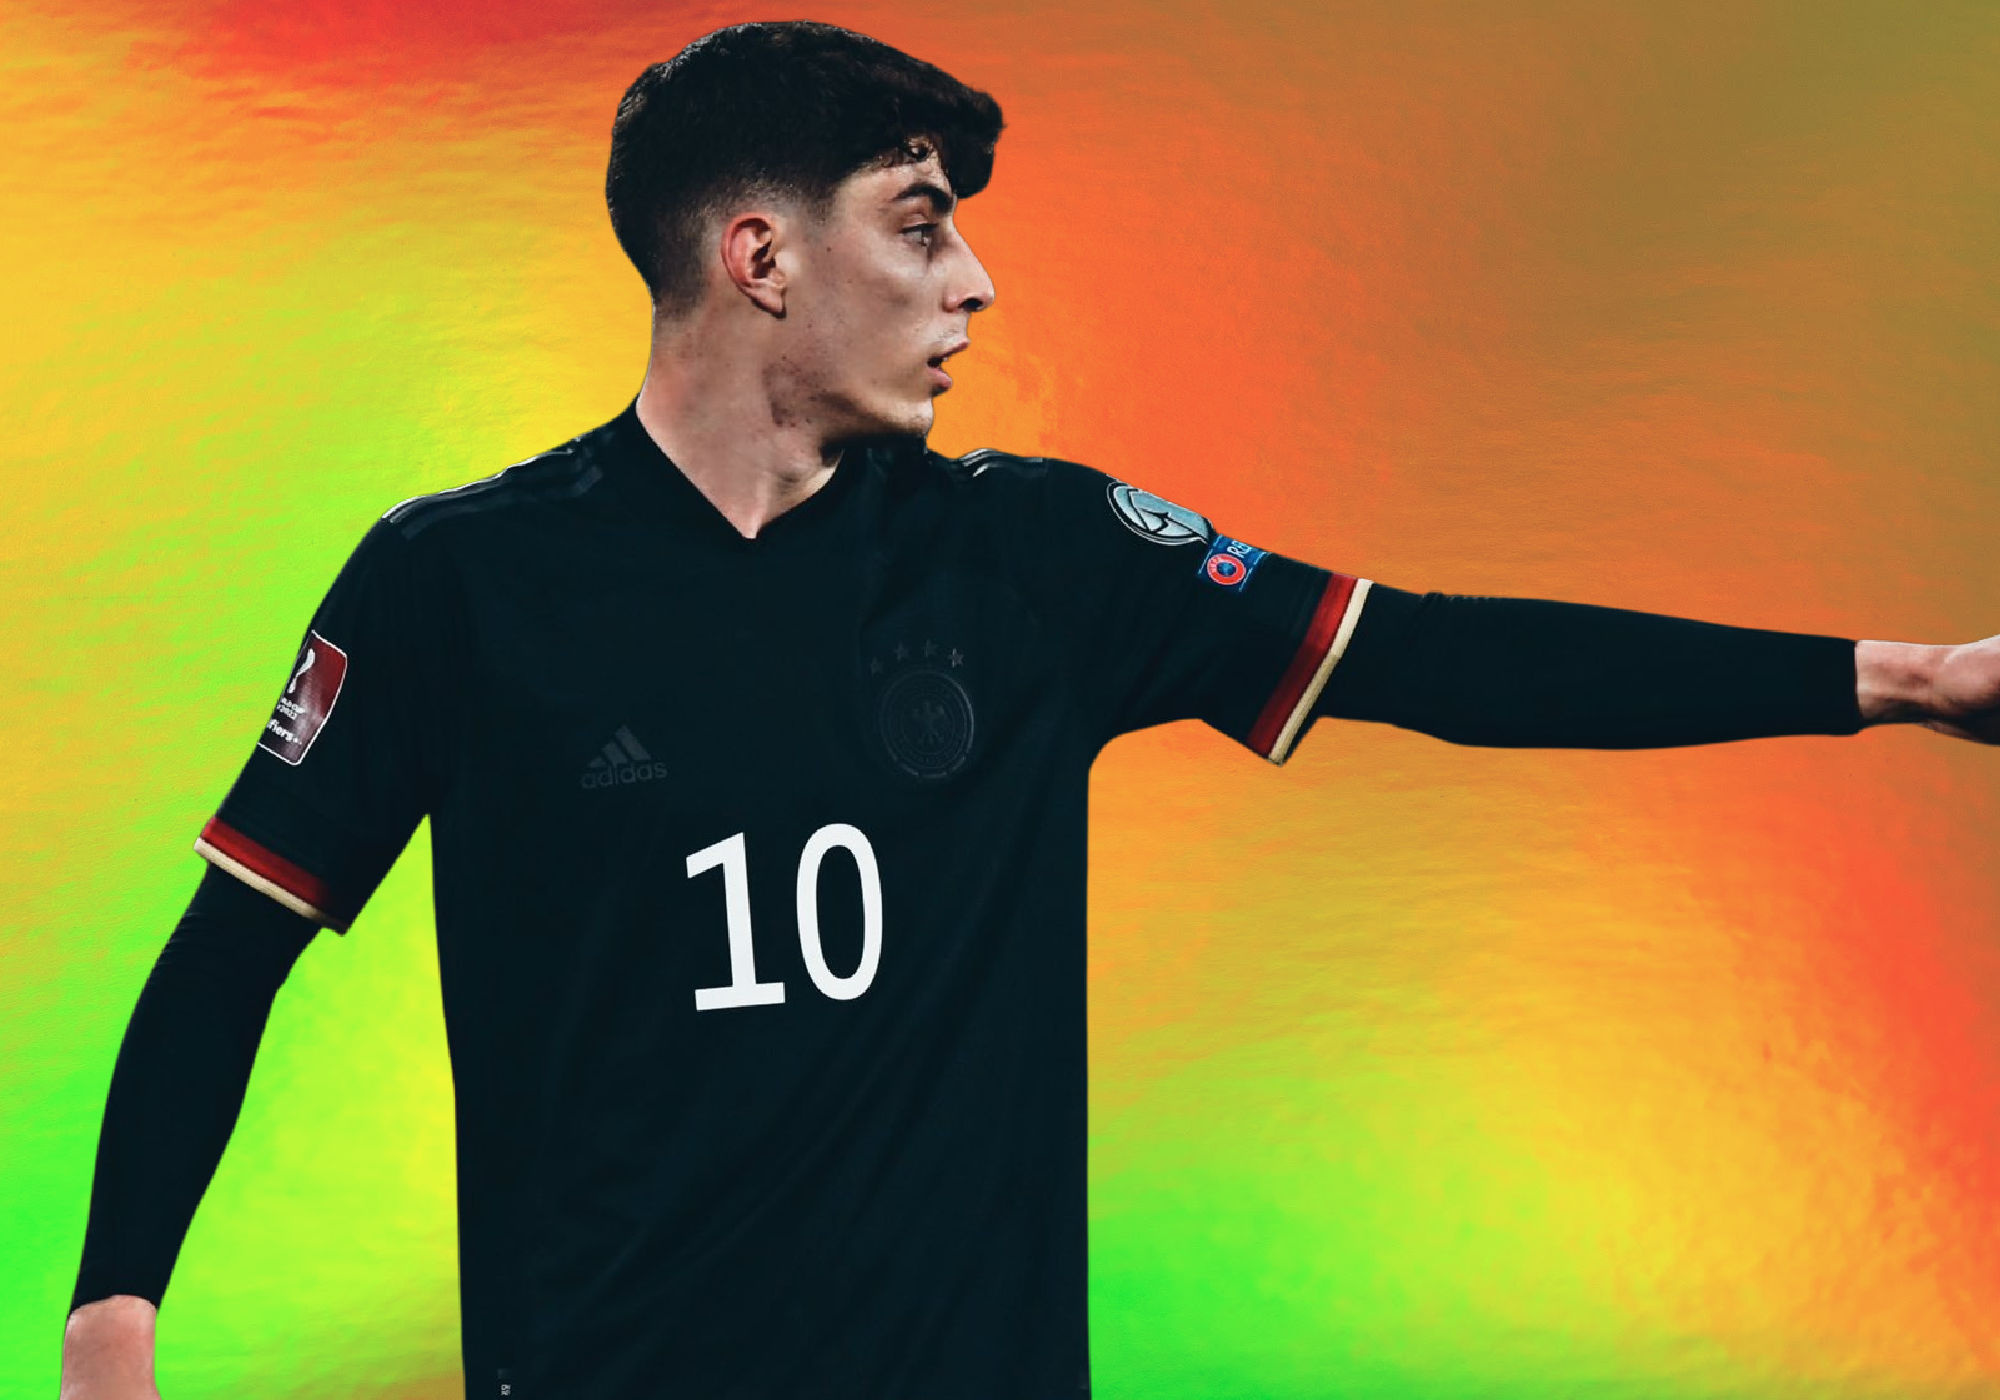 Verdict: Blackout Germany away kit from Adidas is cold AF